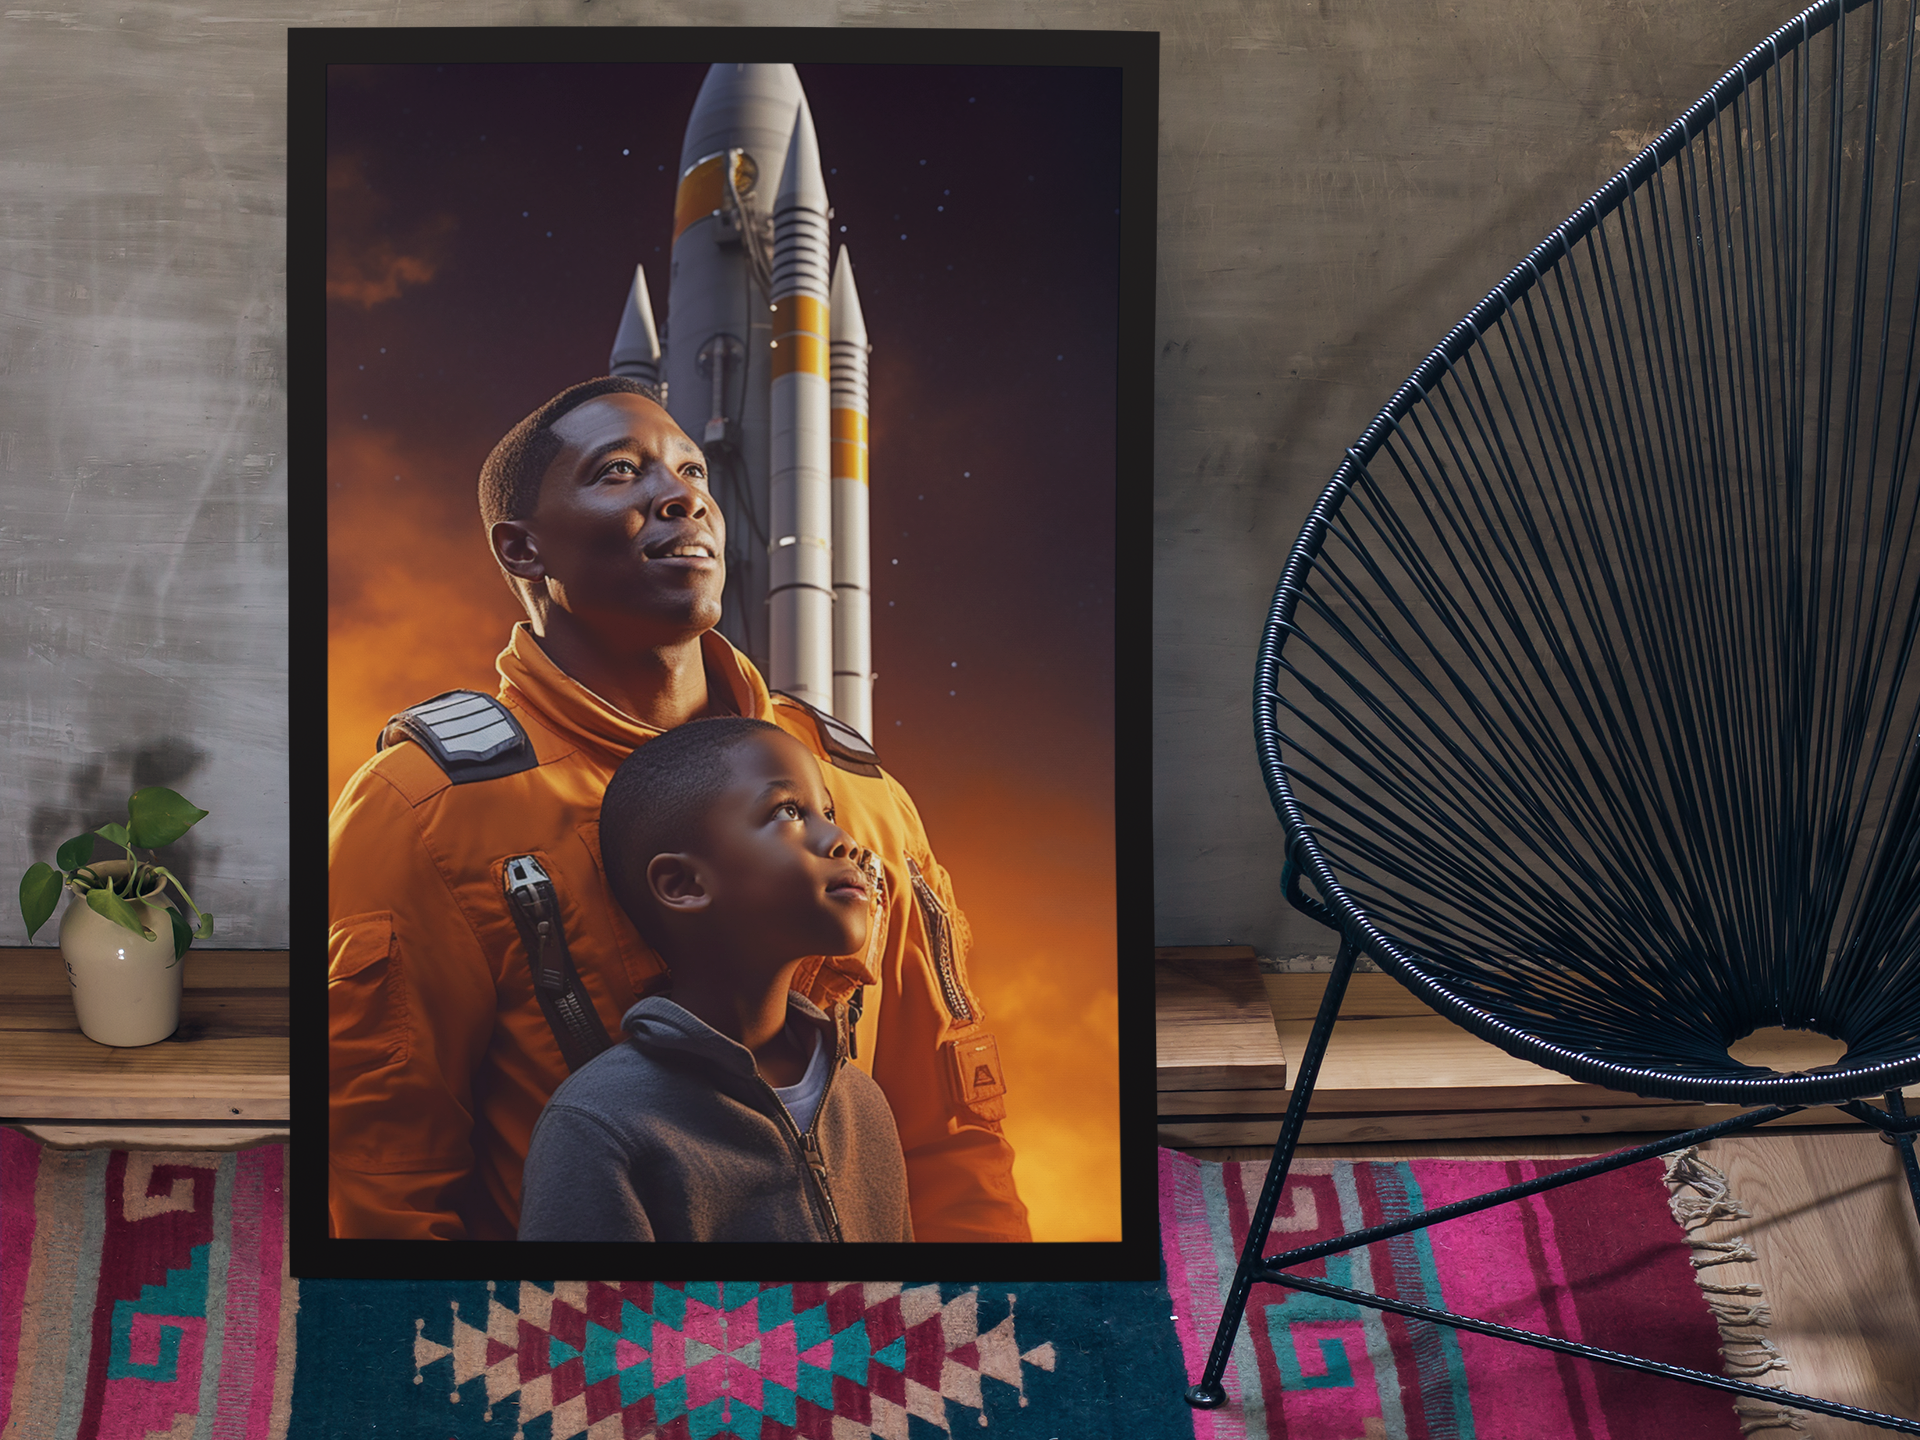 "THE LAUNCH PAD" - KID'S ROOM POSTER WALL ART